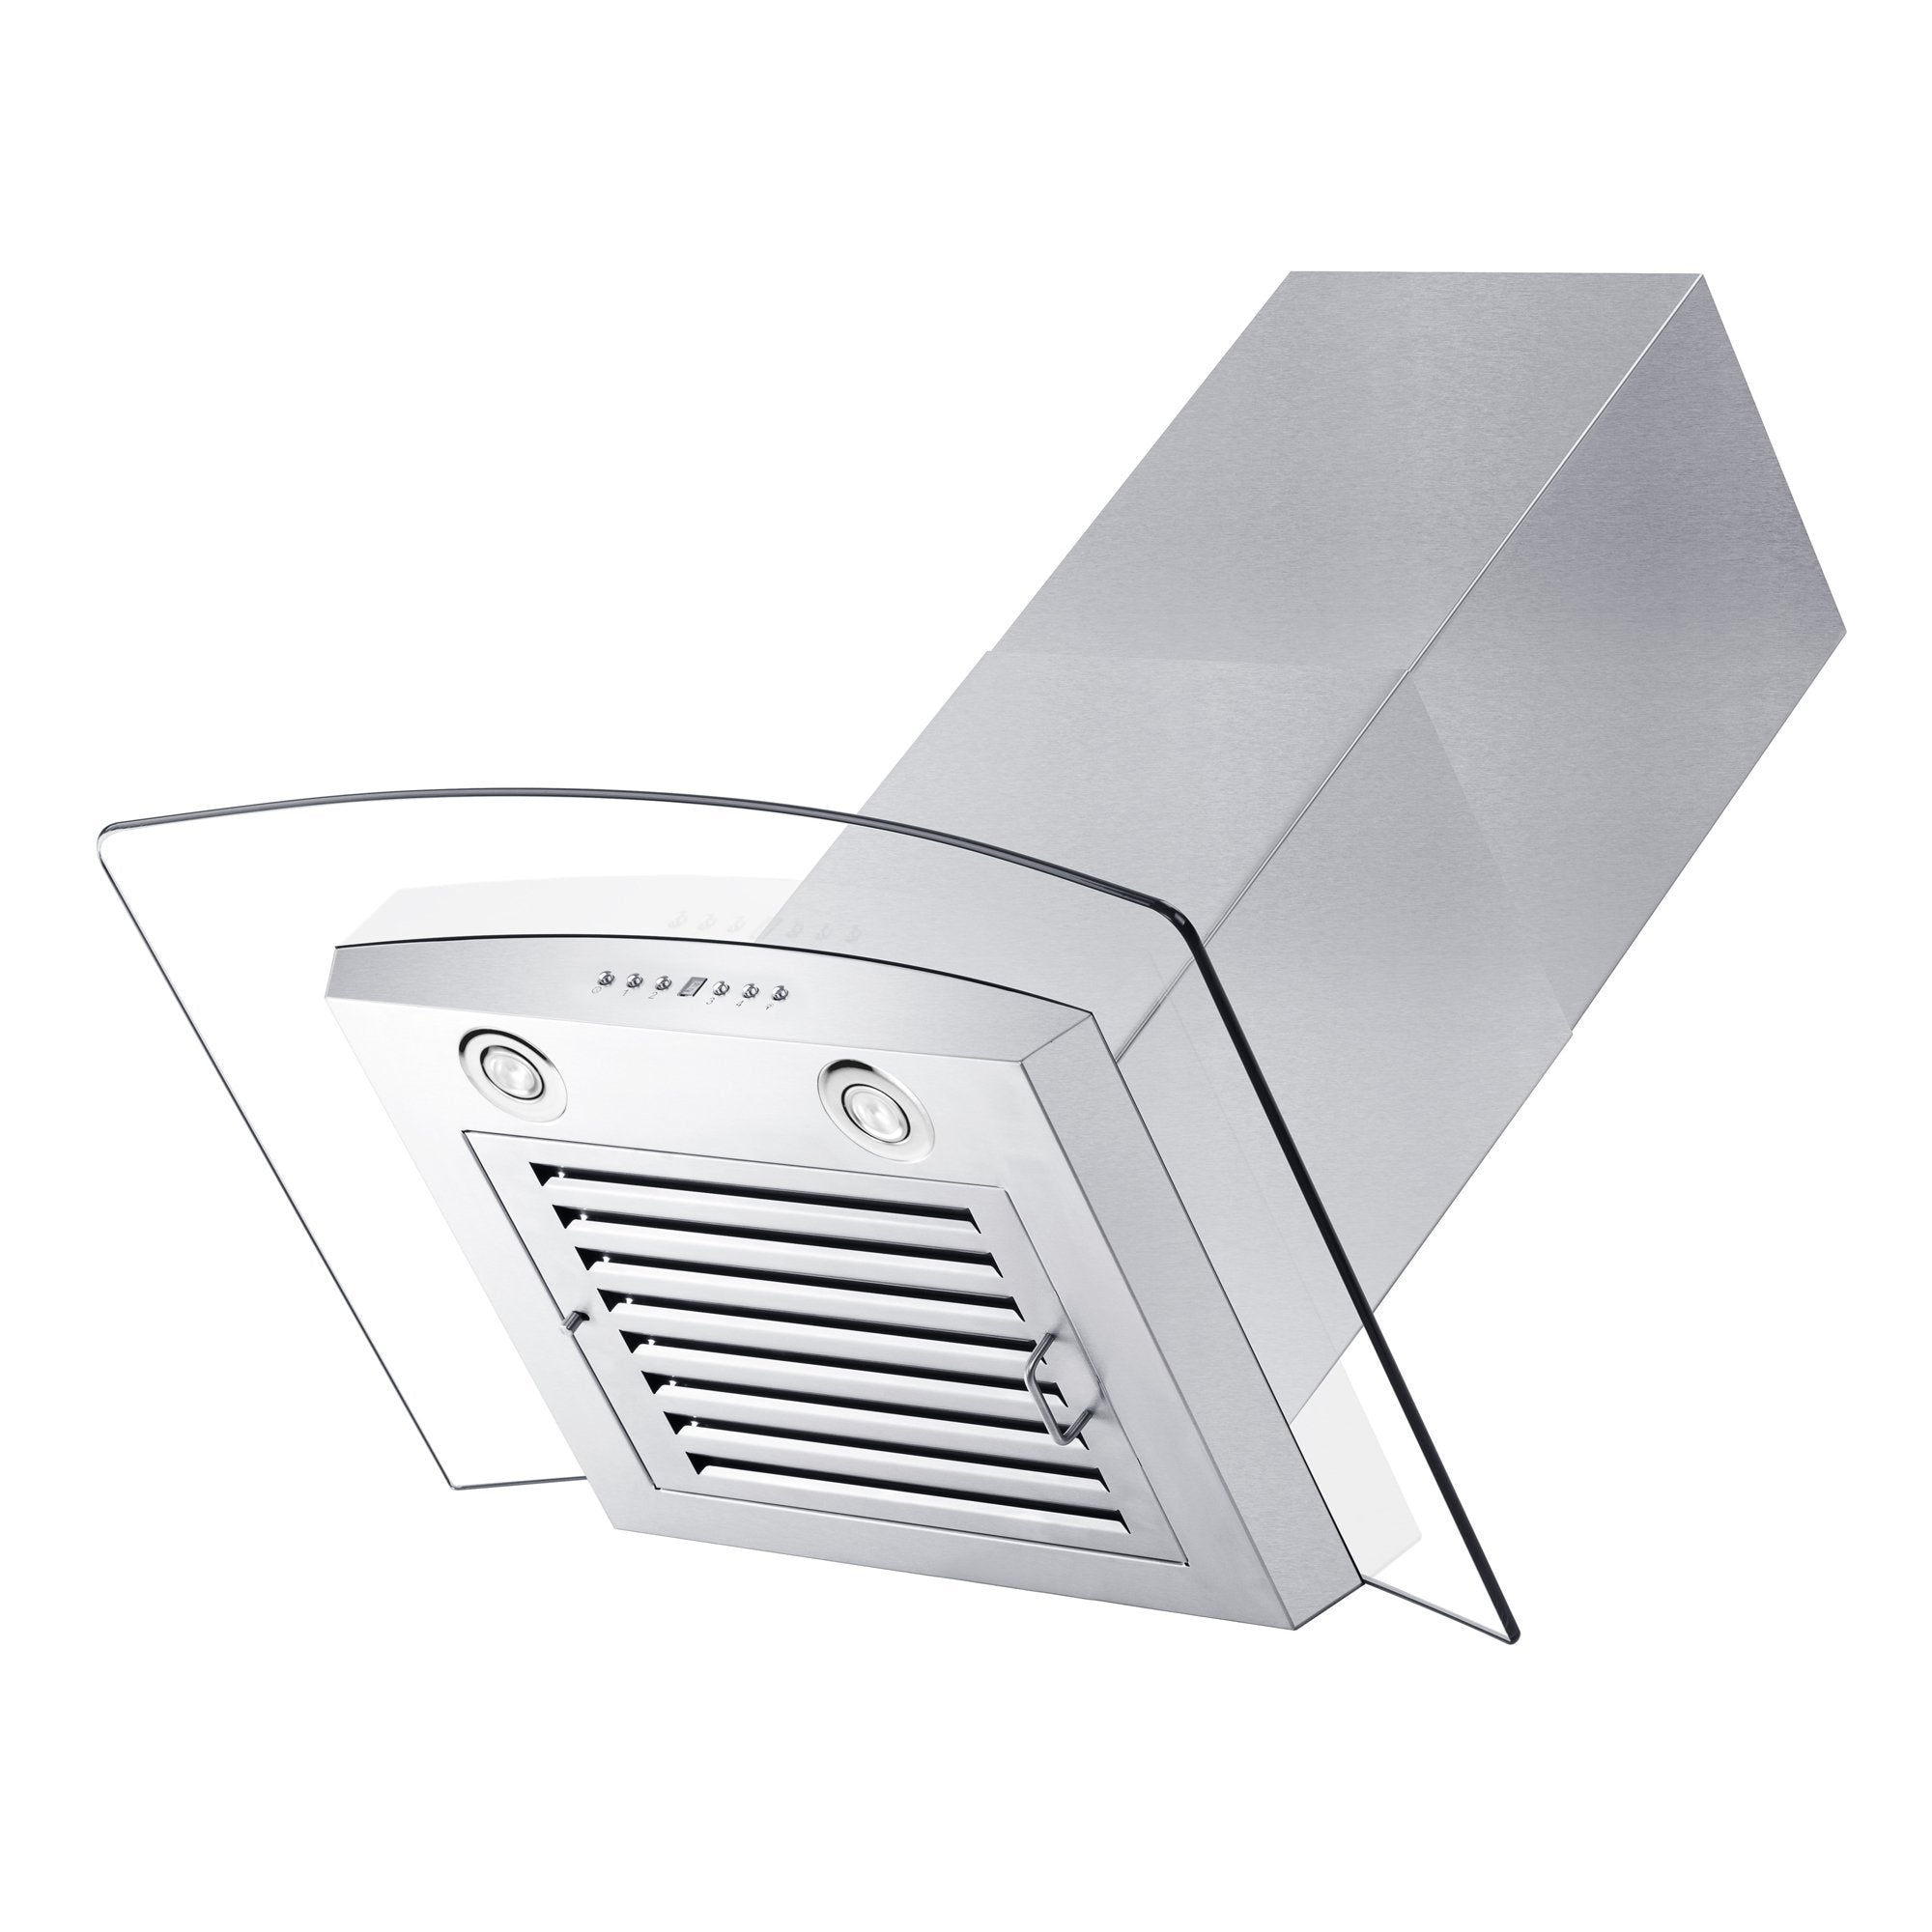 ZLINE Convertible Vent Wall Mount Range Hood in Stainless Steel & Glass (KZ) angled under showing LED lighting and baffle filter.